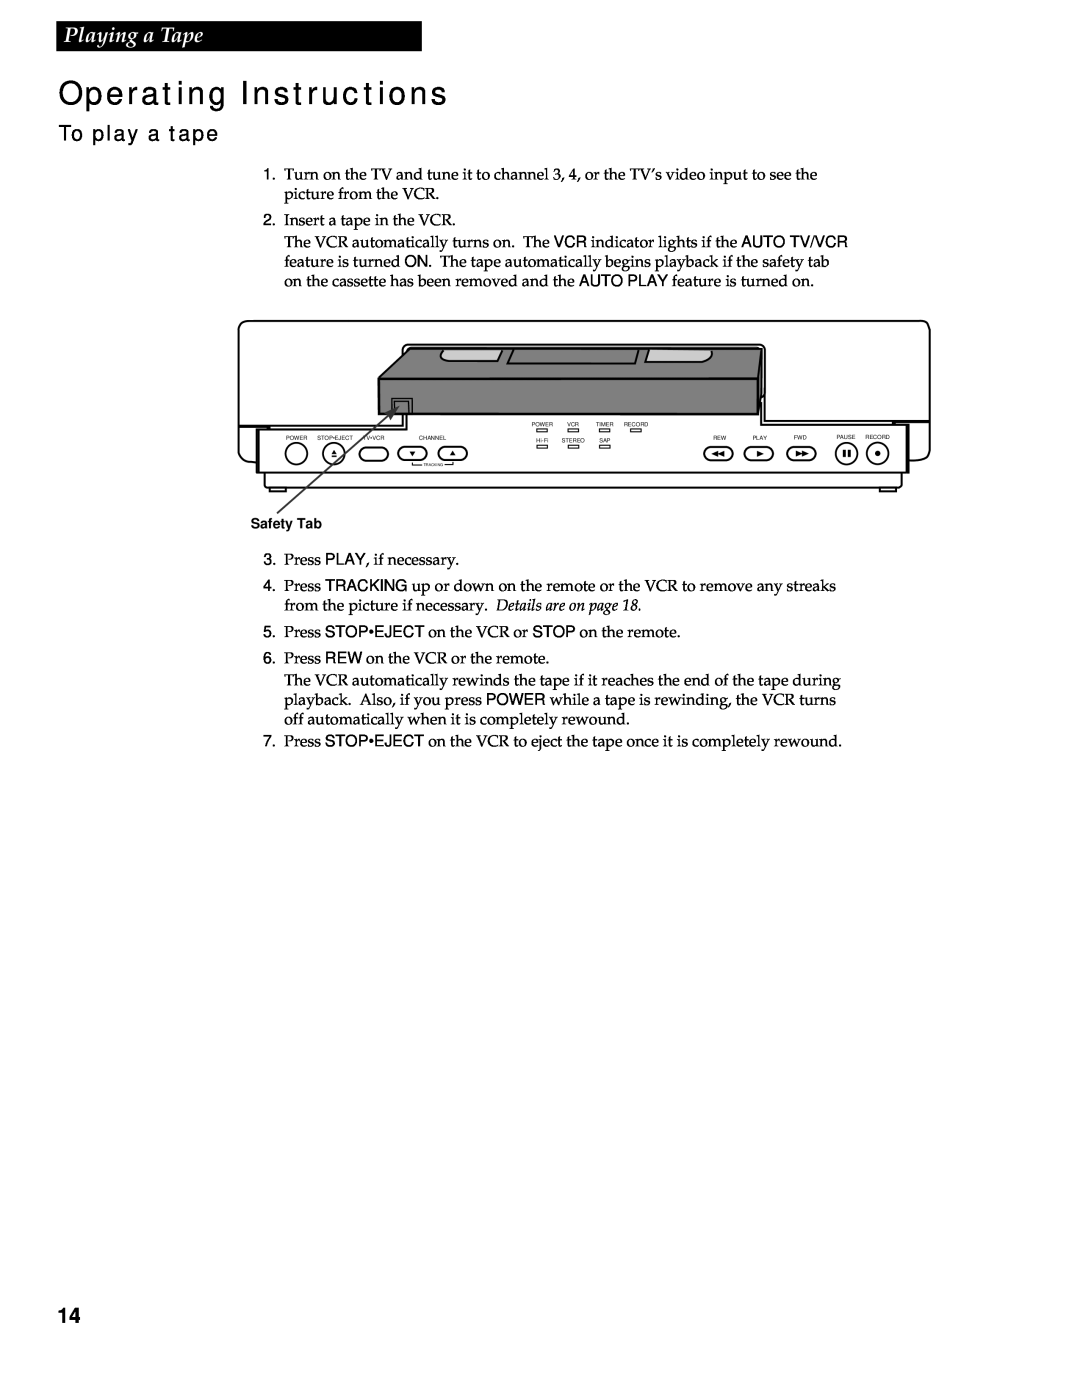 RCA VR602HF manual Operating Instructions, Playing a Tape, To play a tape 